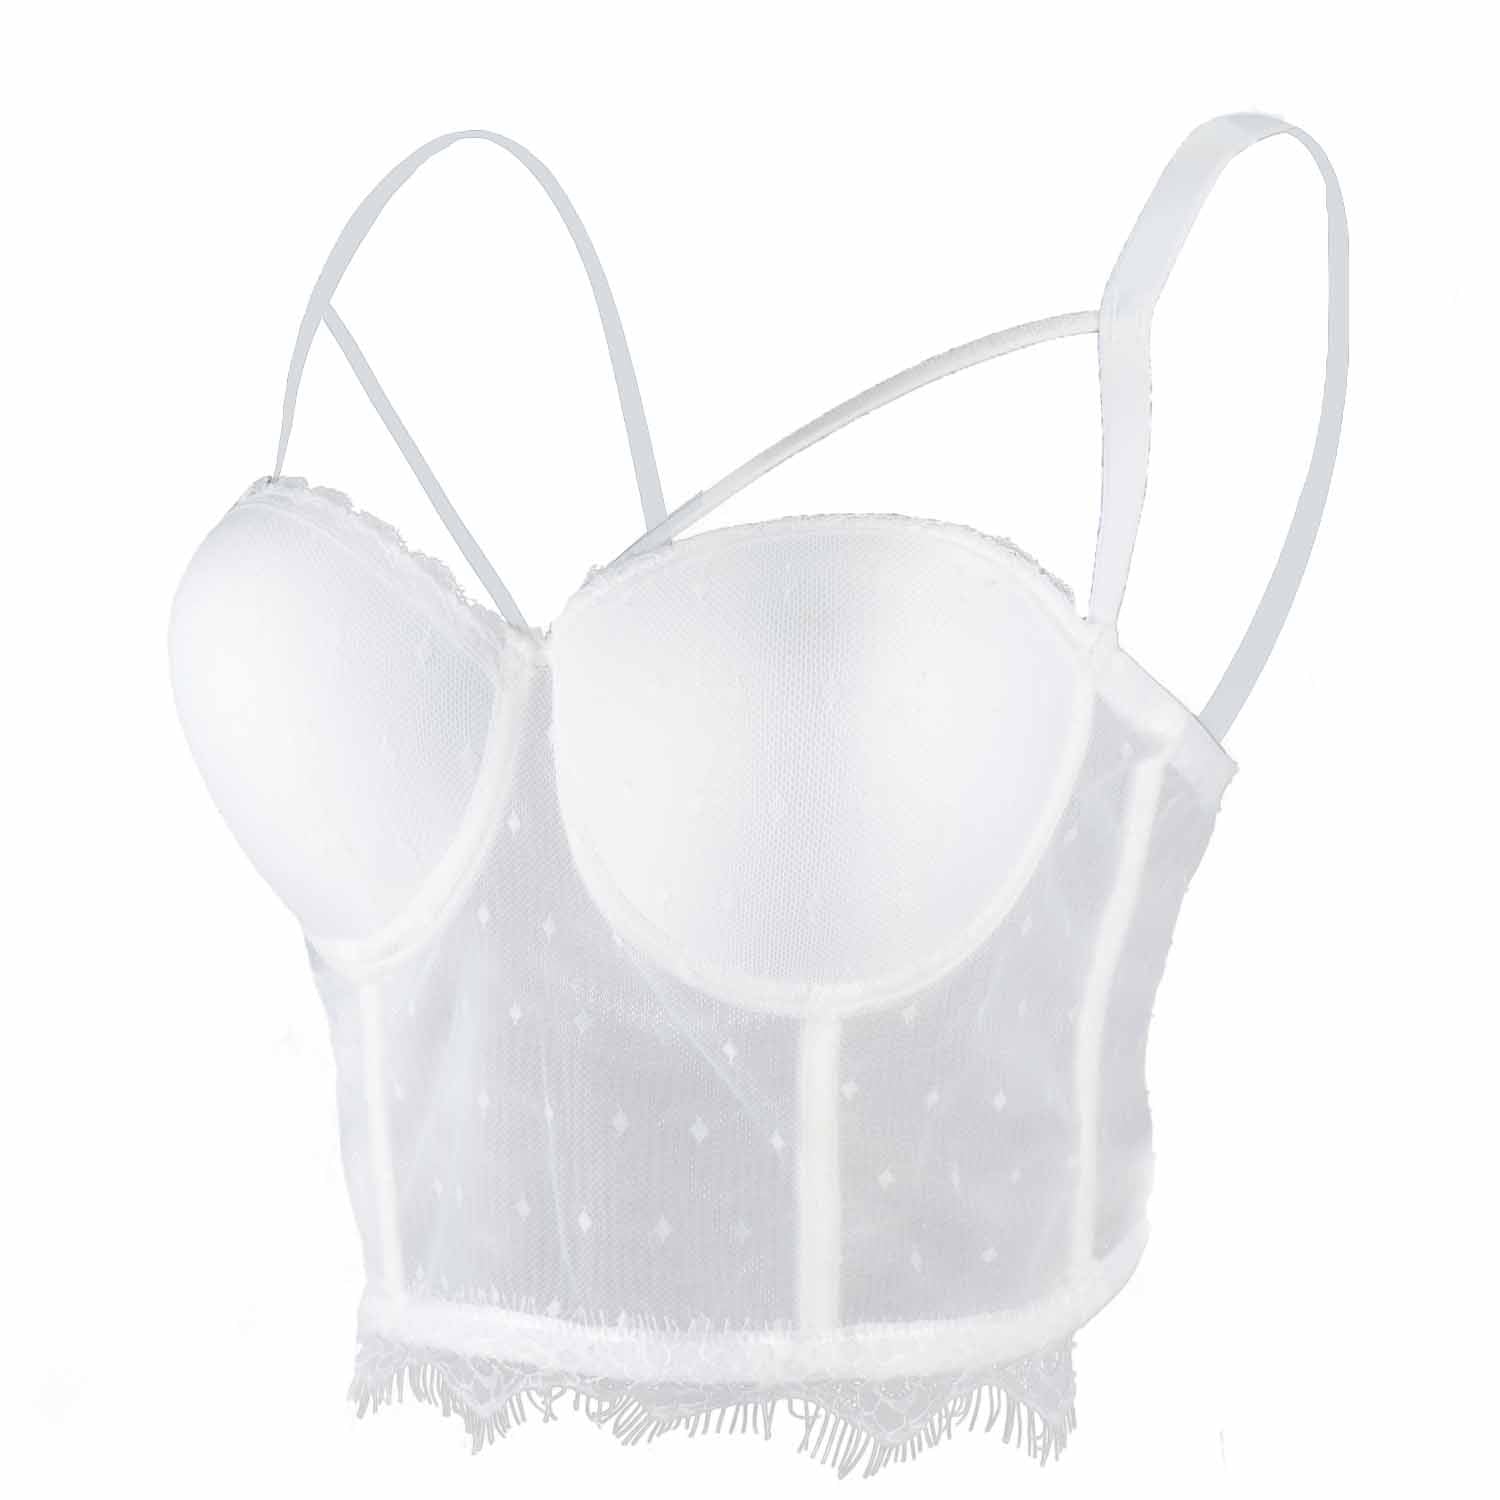 Women's Mesh Bustier Crop Top Strappy Underwire Padded Push Up Corset Bra  Top